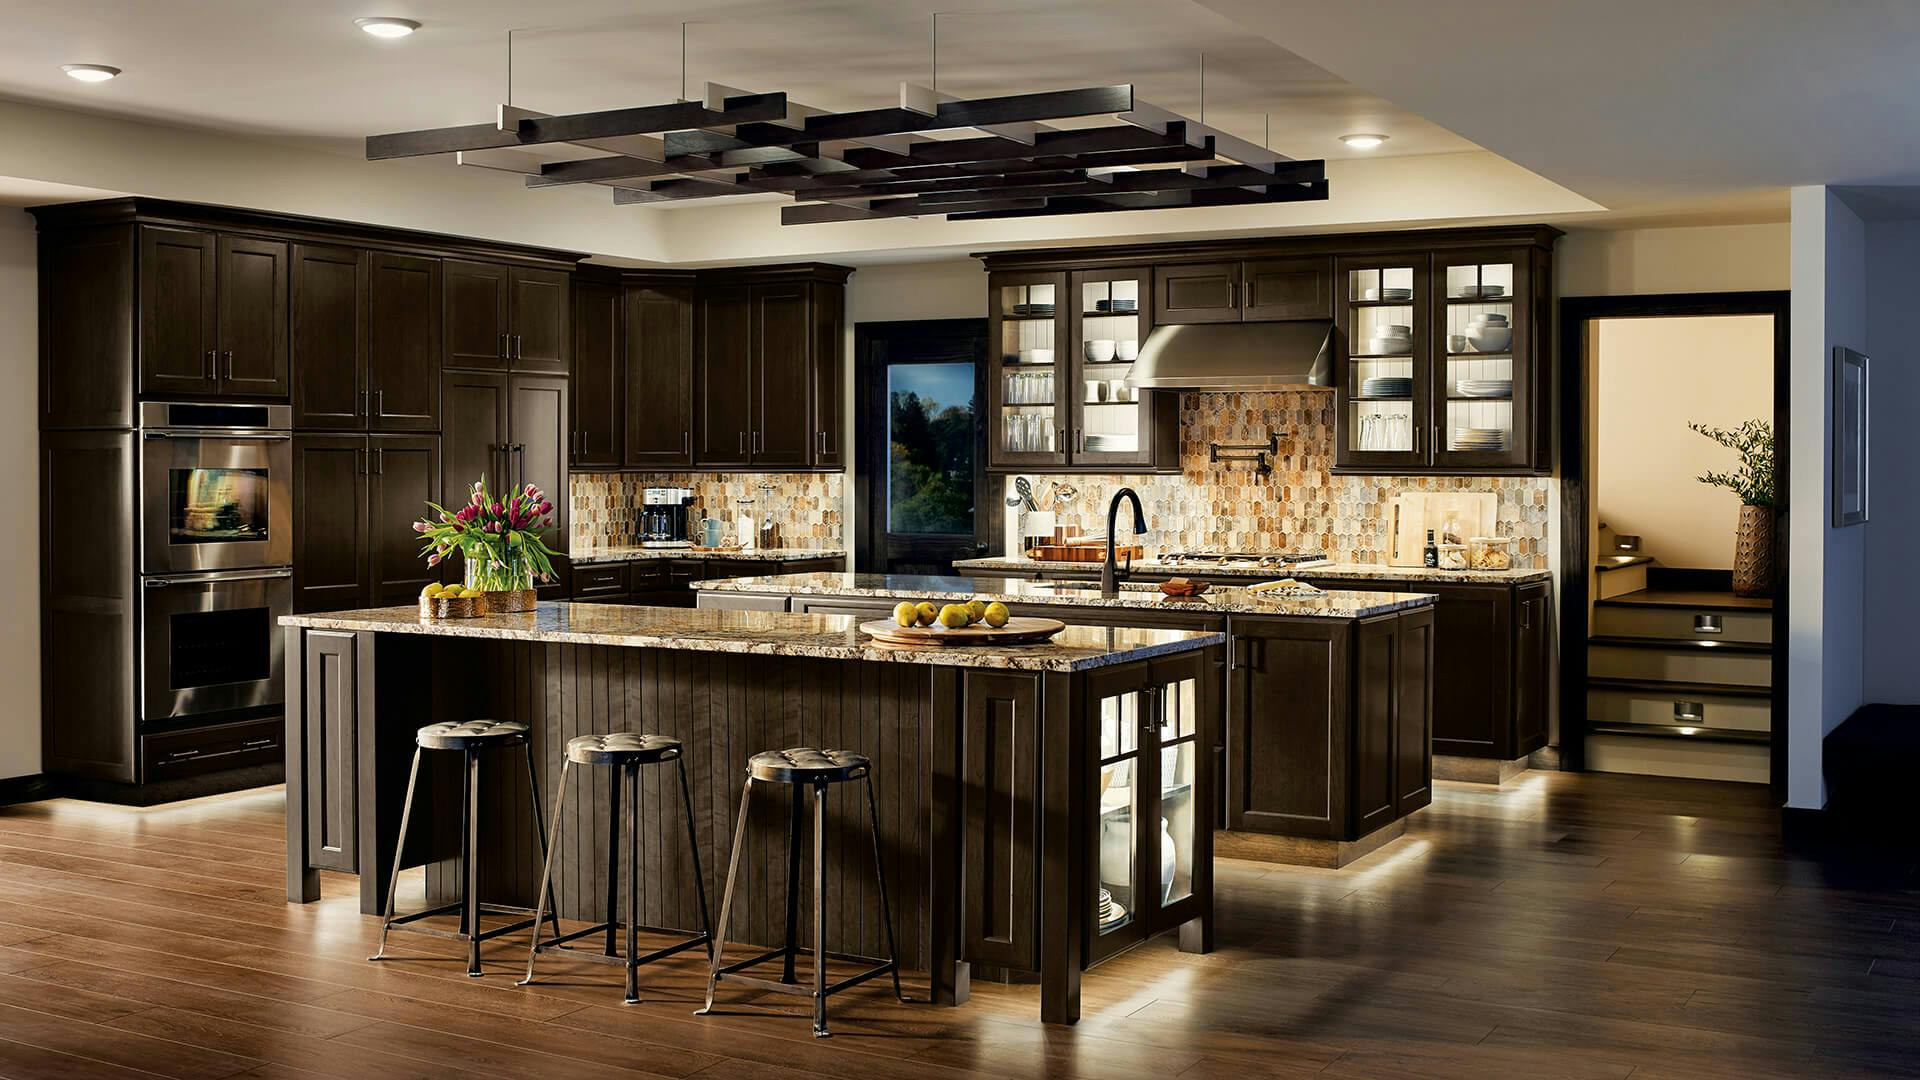 Kitchen aglow with 6TL Dry Tape Lights underneath the island and cabinets along with several downlights on the ceiling